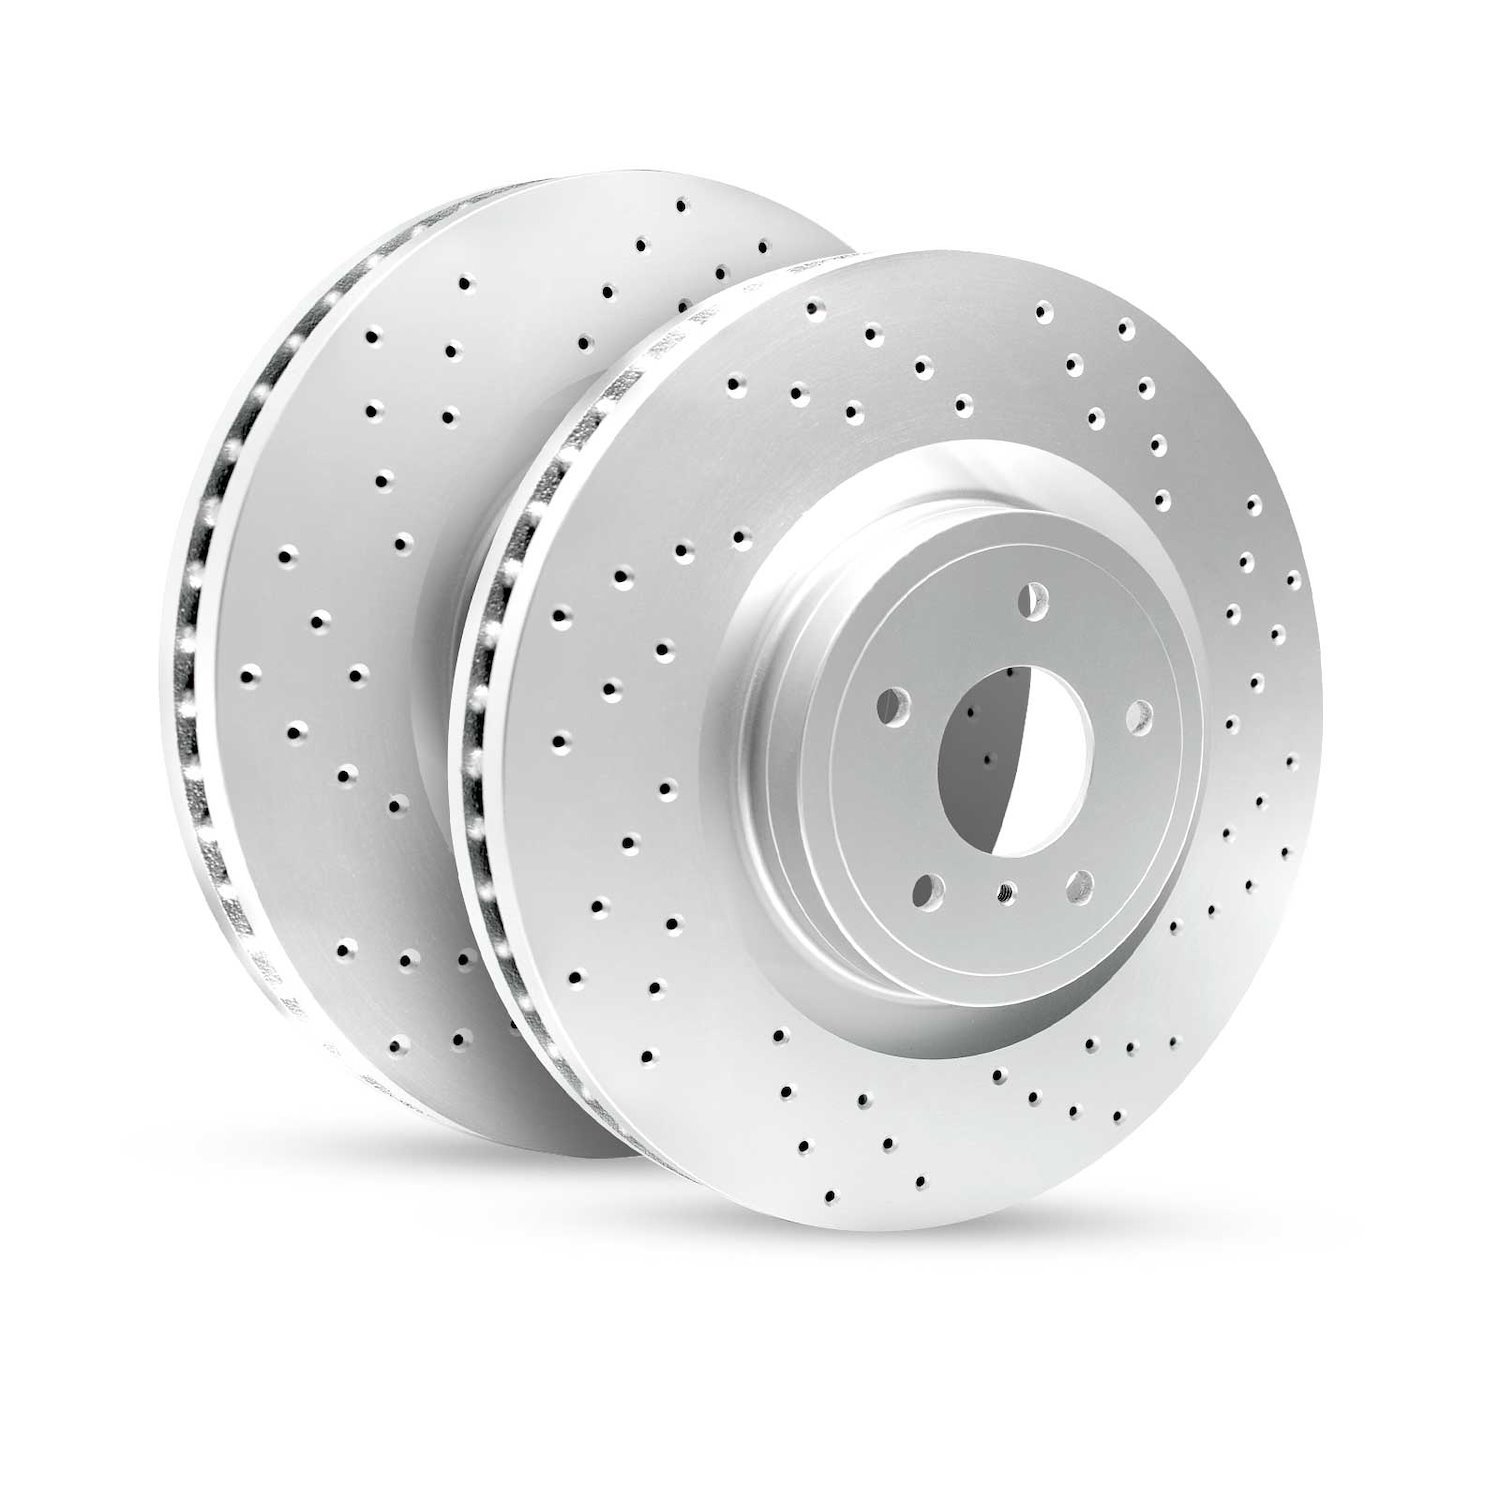 GEO-Carbon Drilled/Slotted Rotors, 2005-2020 Fits Multiple Makes/Models, Position: Front